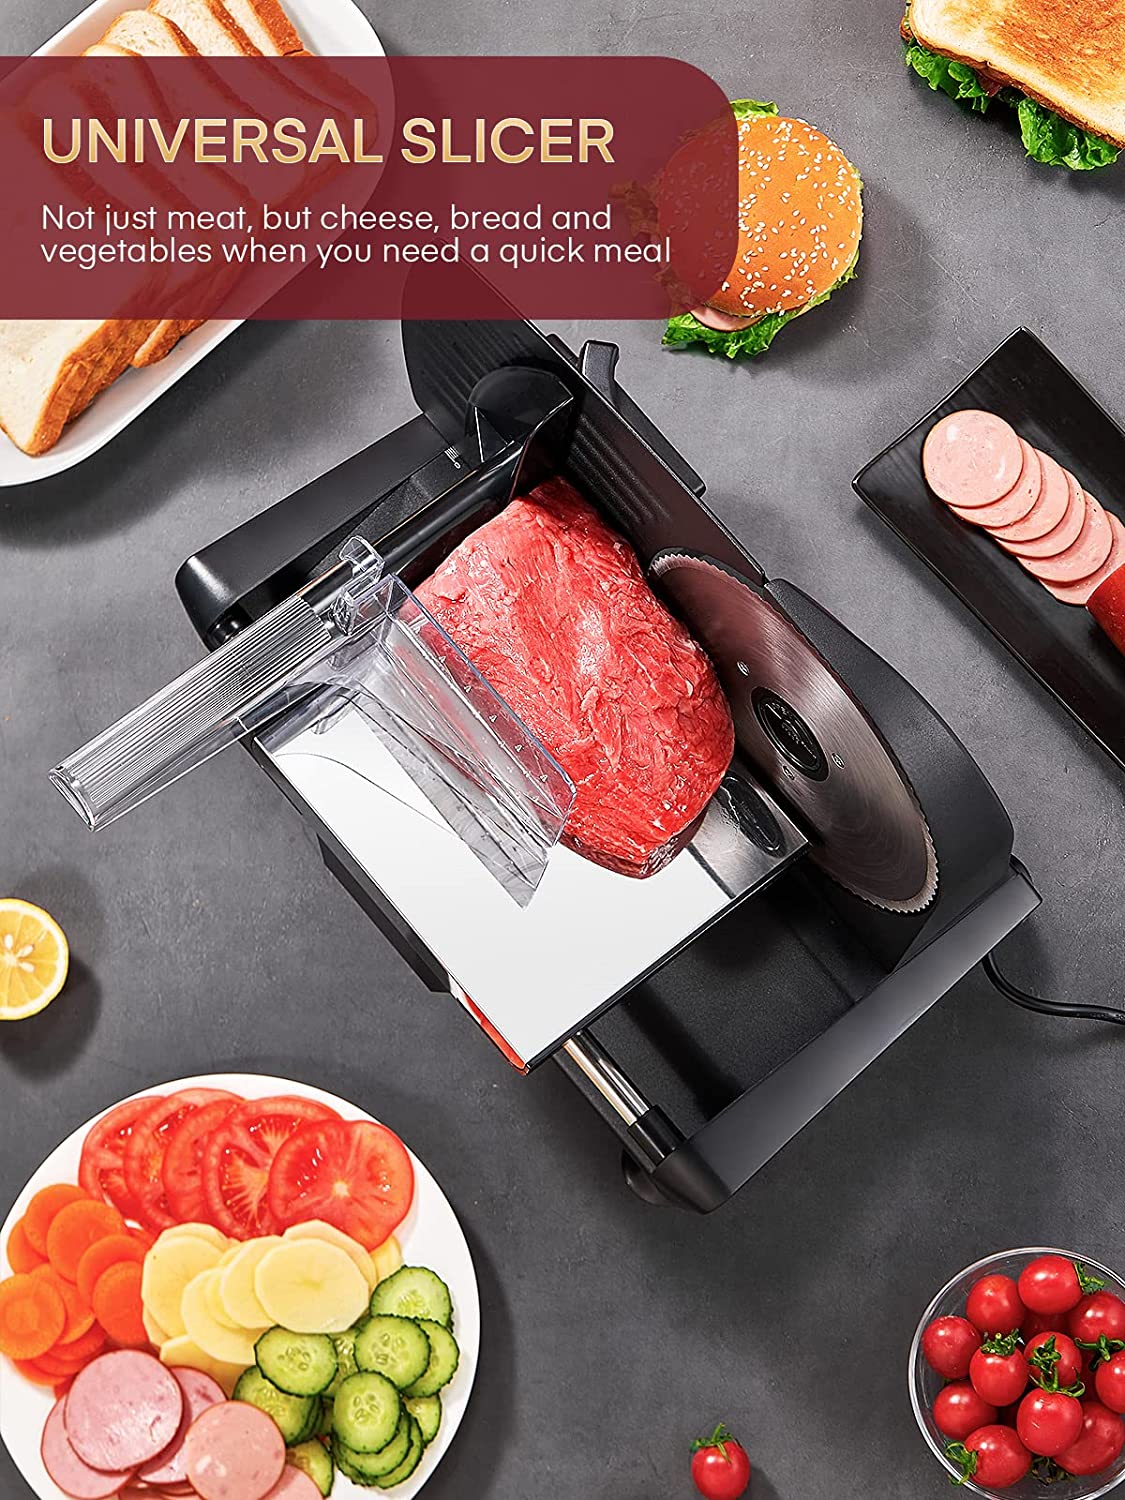 universal slicer, Meat Slicer 200 Watt for Home Use, Electric Food Slicer with “Two” Upgrade 7.5" Sharp Stainless Steel Blade(Serrated + Smooth) & 0-15mm Precise Thickness Cut Deli Food, Meat, Bread, Fruit, Vegetable